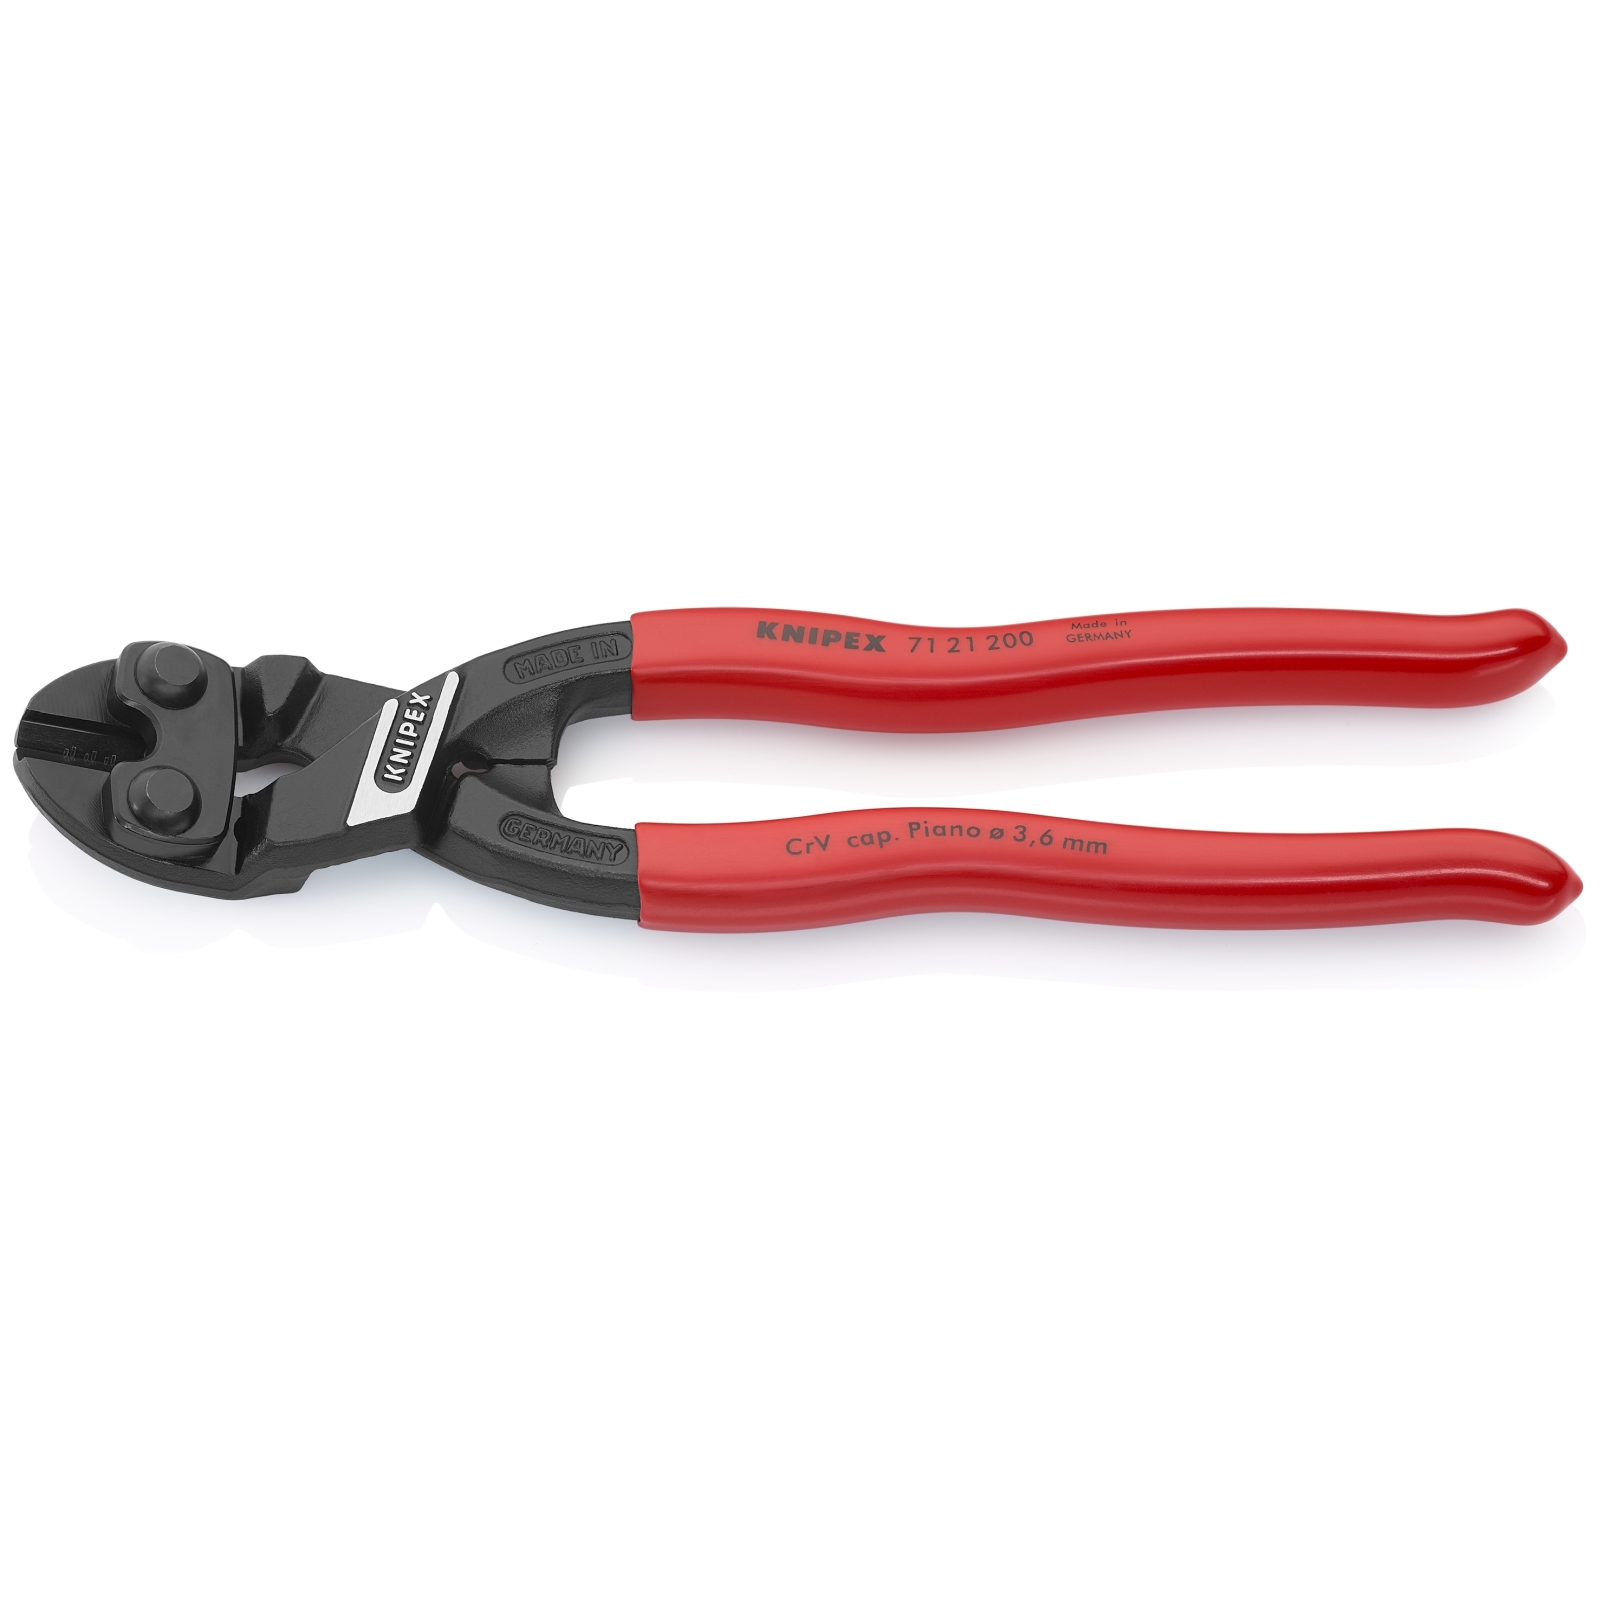 Knipex High Leverage 8" Mini Bolt Cutter with Angled Head and Cutting Notch